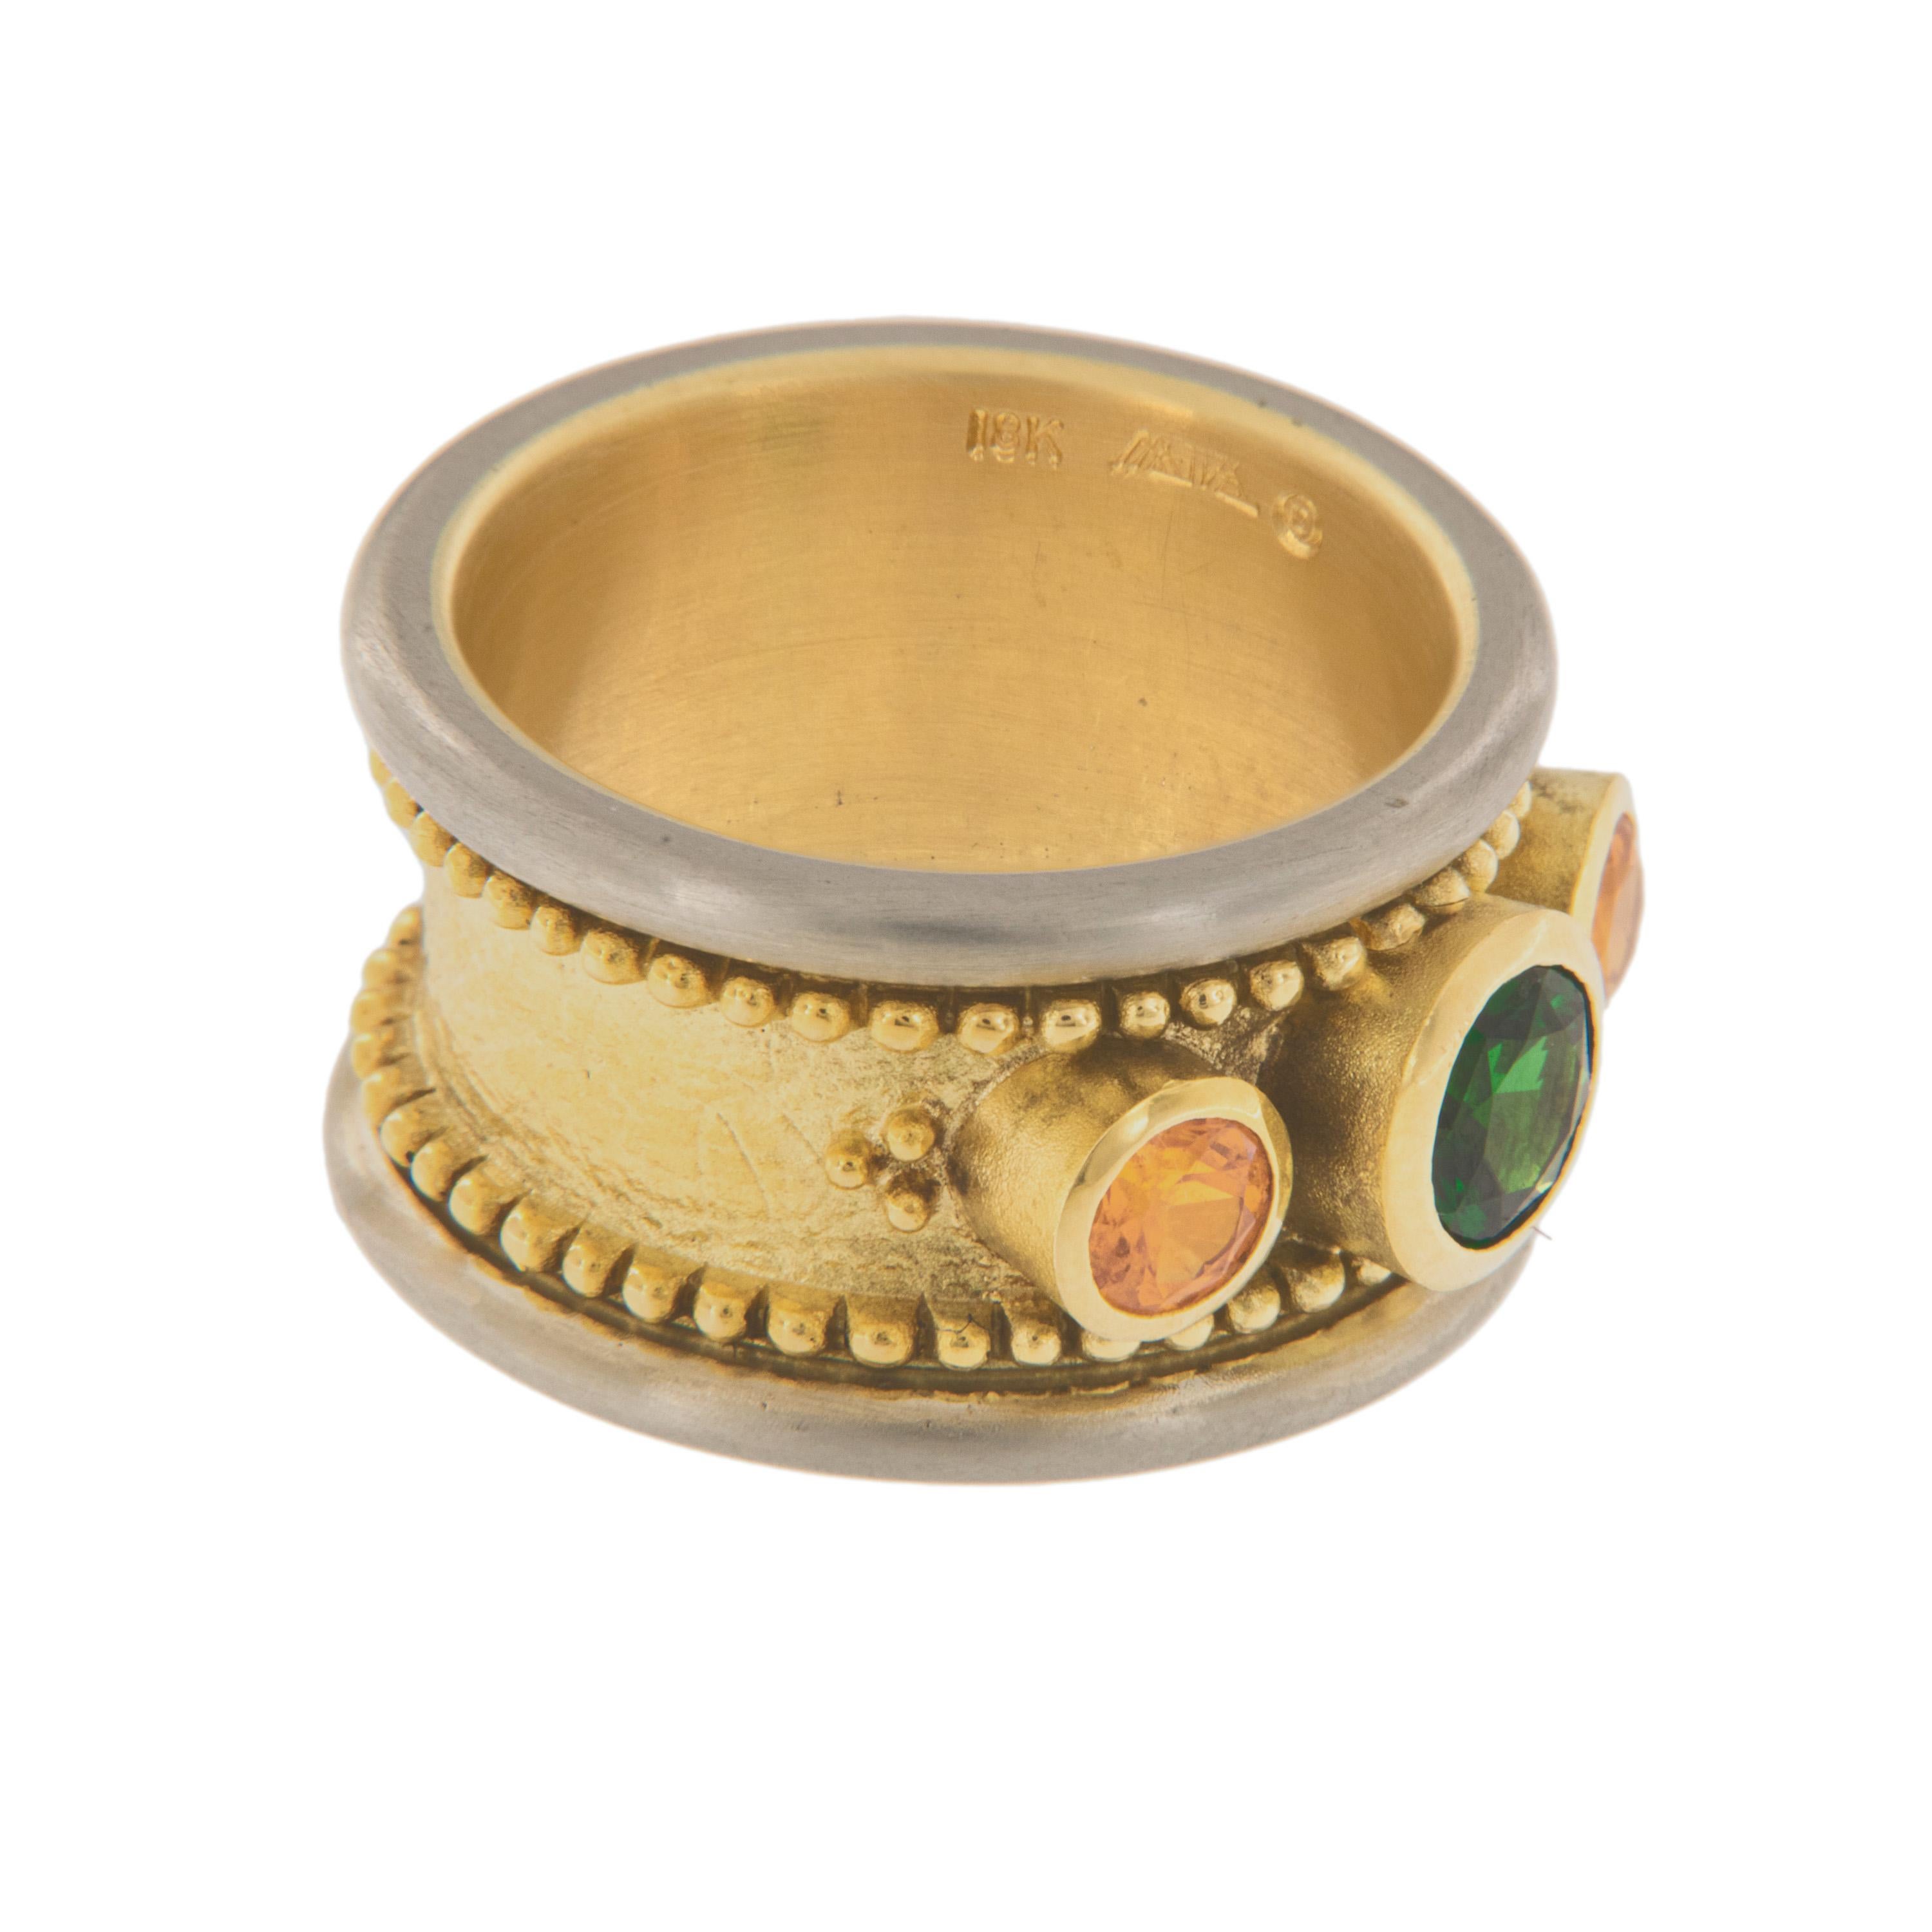 Classical and progressively modern describes Patrick Irla's jewelry. He hand makes his pieces through lost wax casting in his studio from start to finish with attention to detail. This beautiful band ring combines 18 karat yellow & white gold with